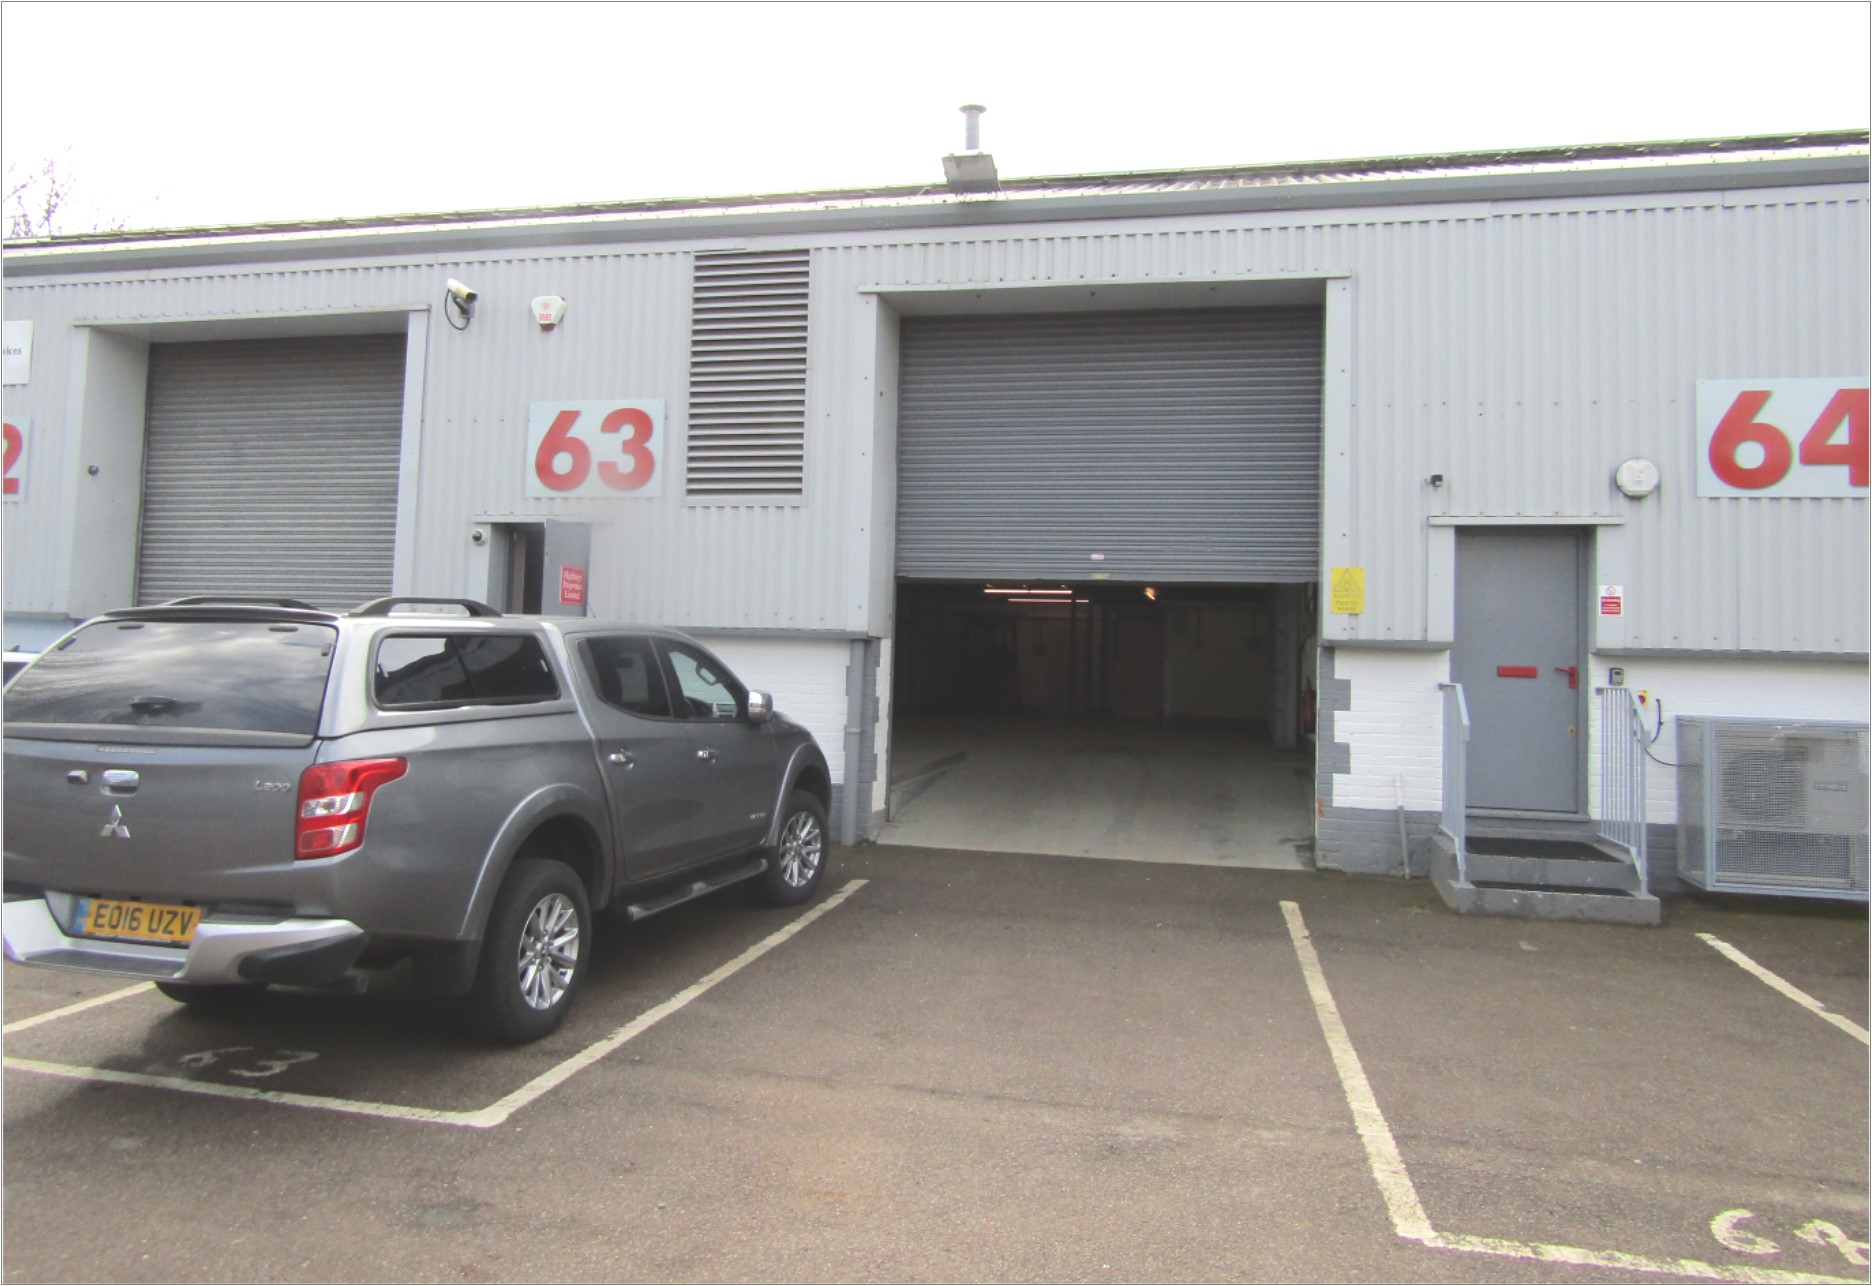 Unit 63, Hillgrove Business Park, Nazeing Road, Nazeing